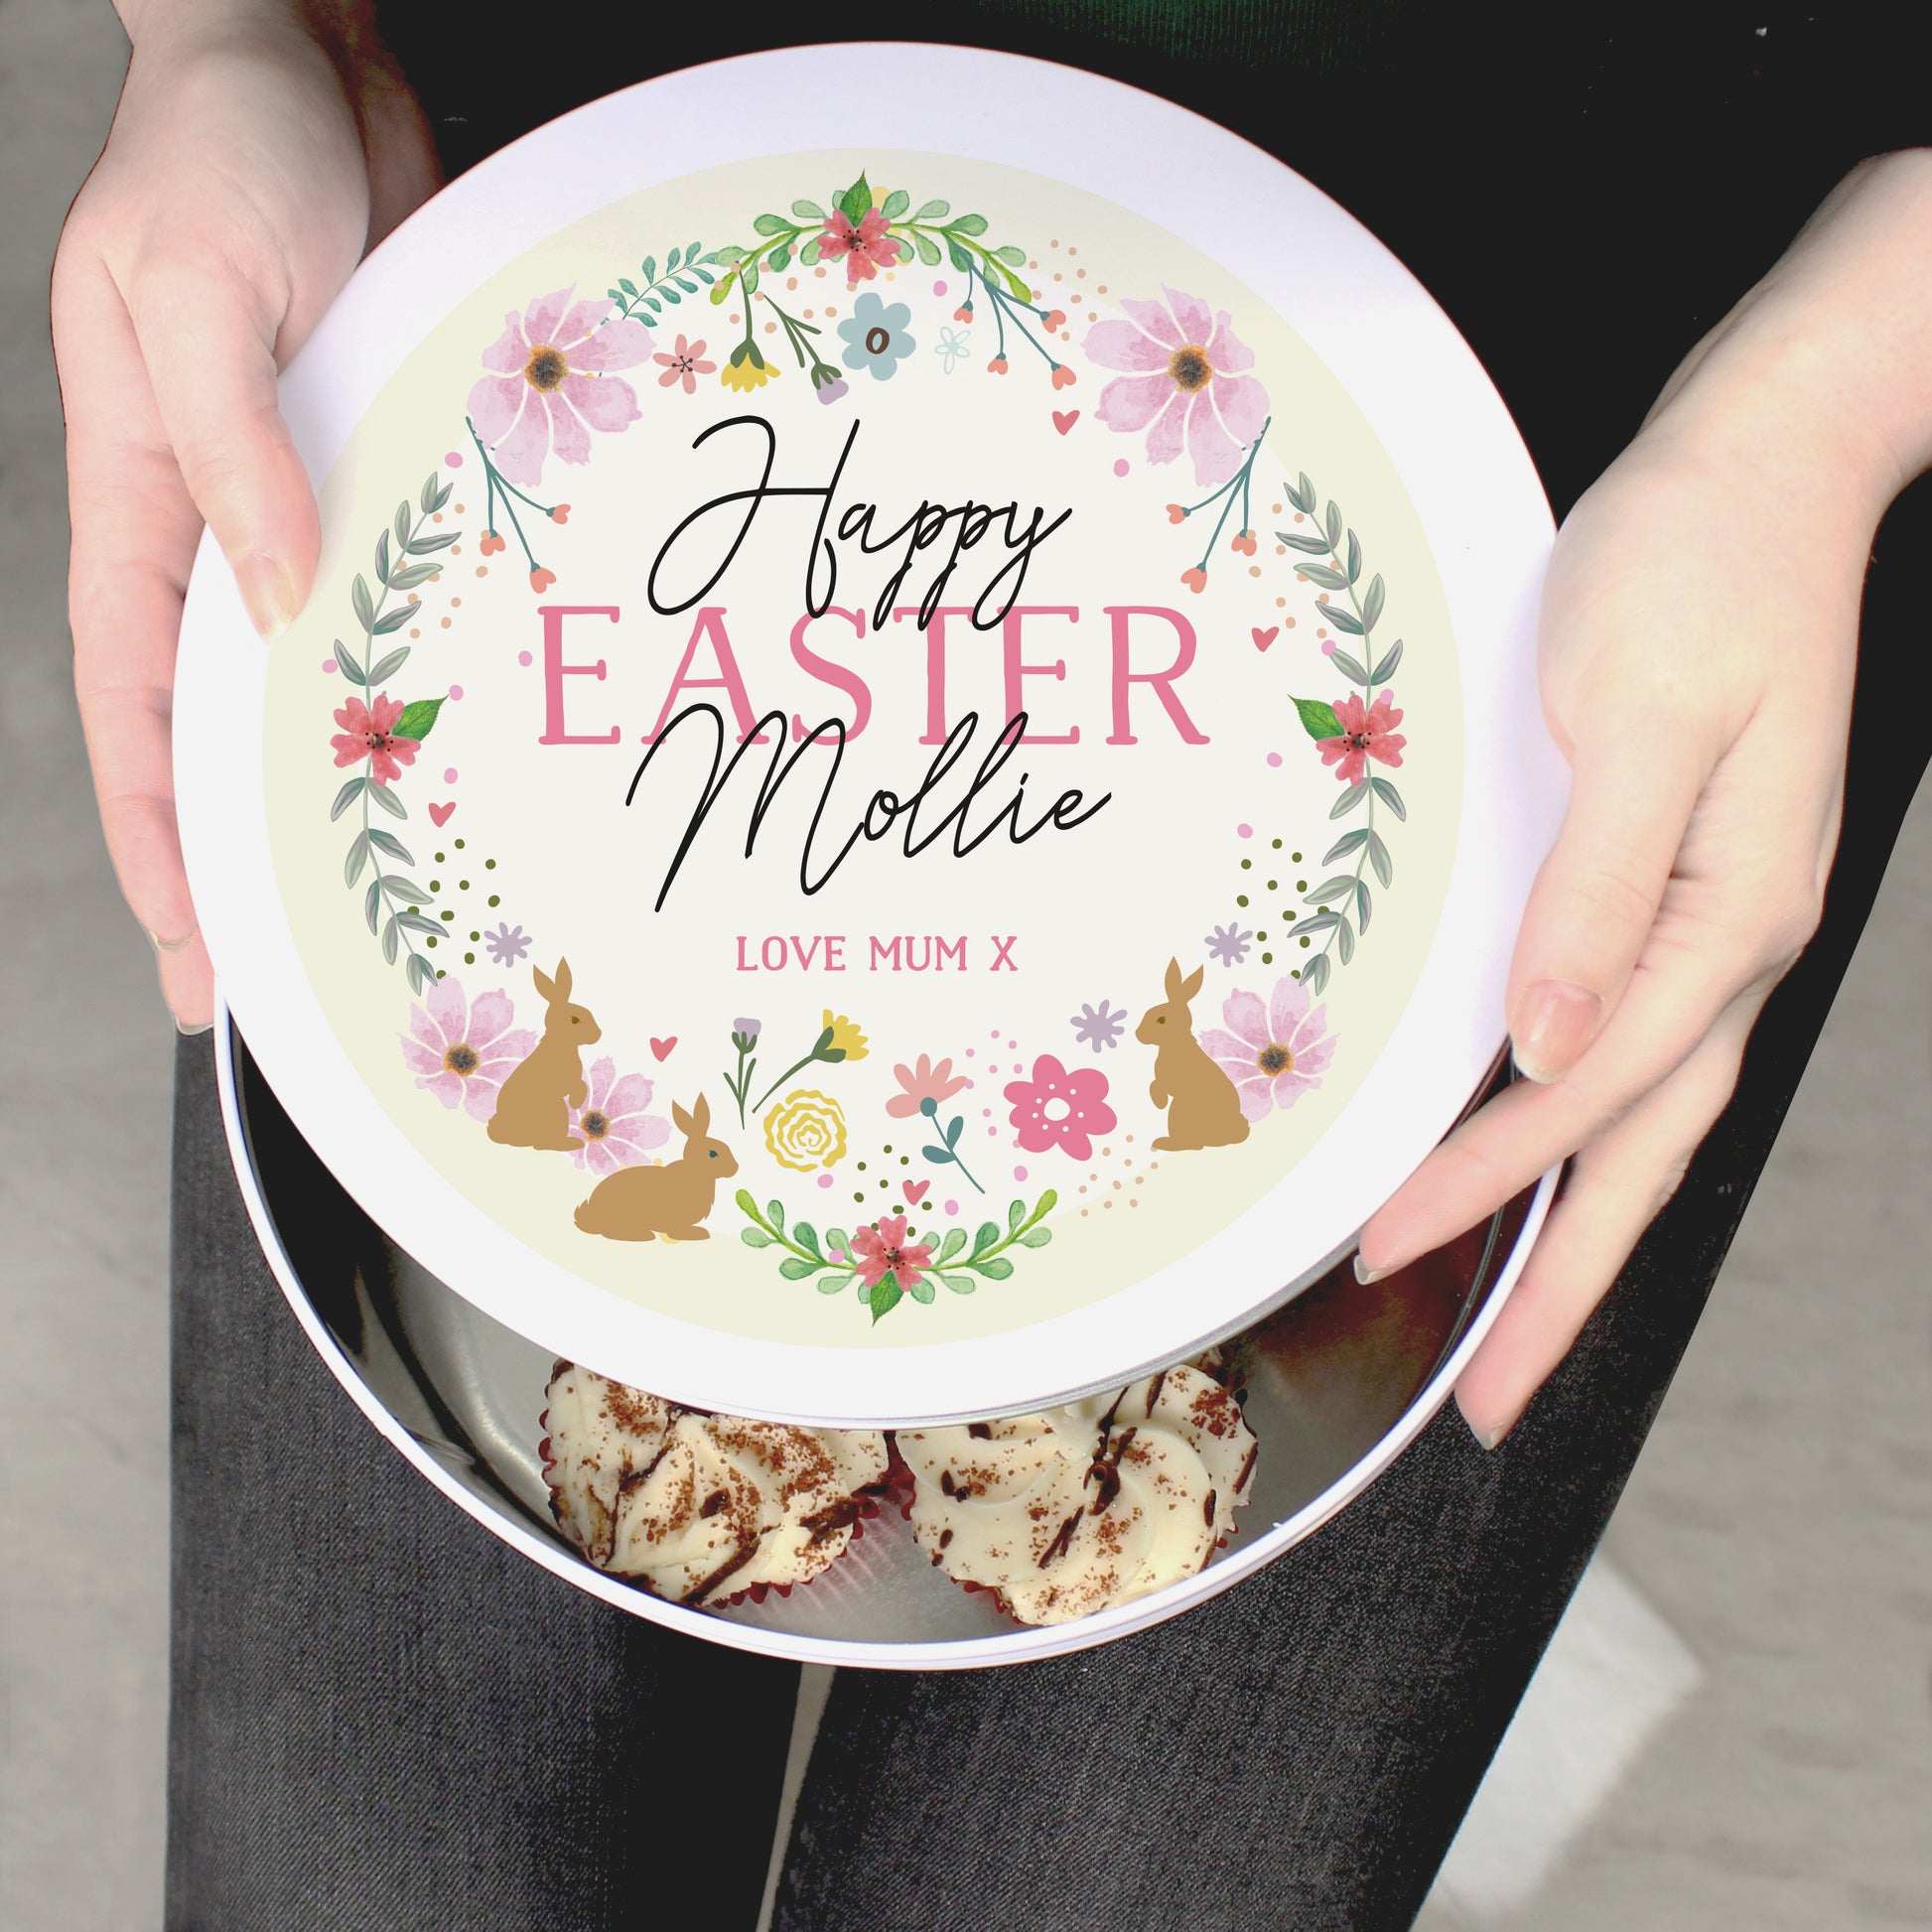 A woman is holding a Personalised Floral Cake Tin that says "Happy EASTER Mollie LOVE MUM X"